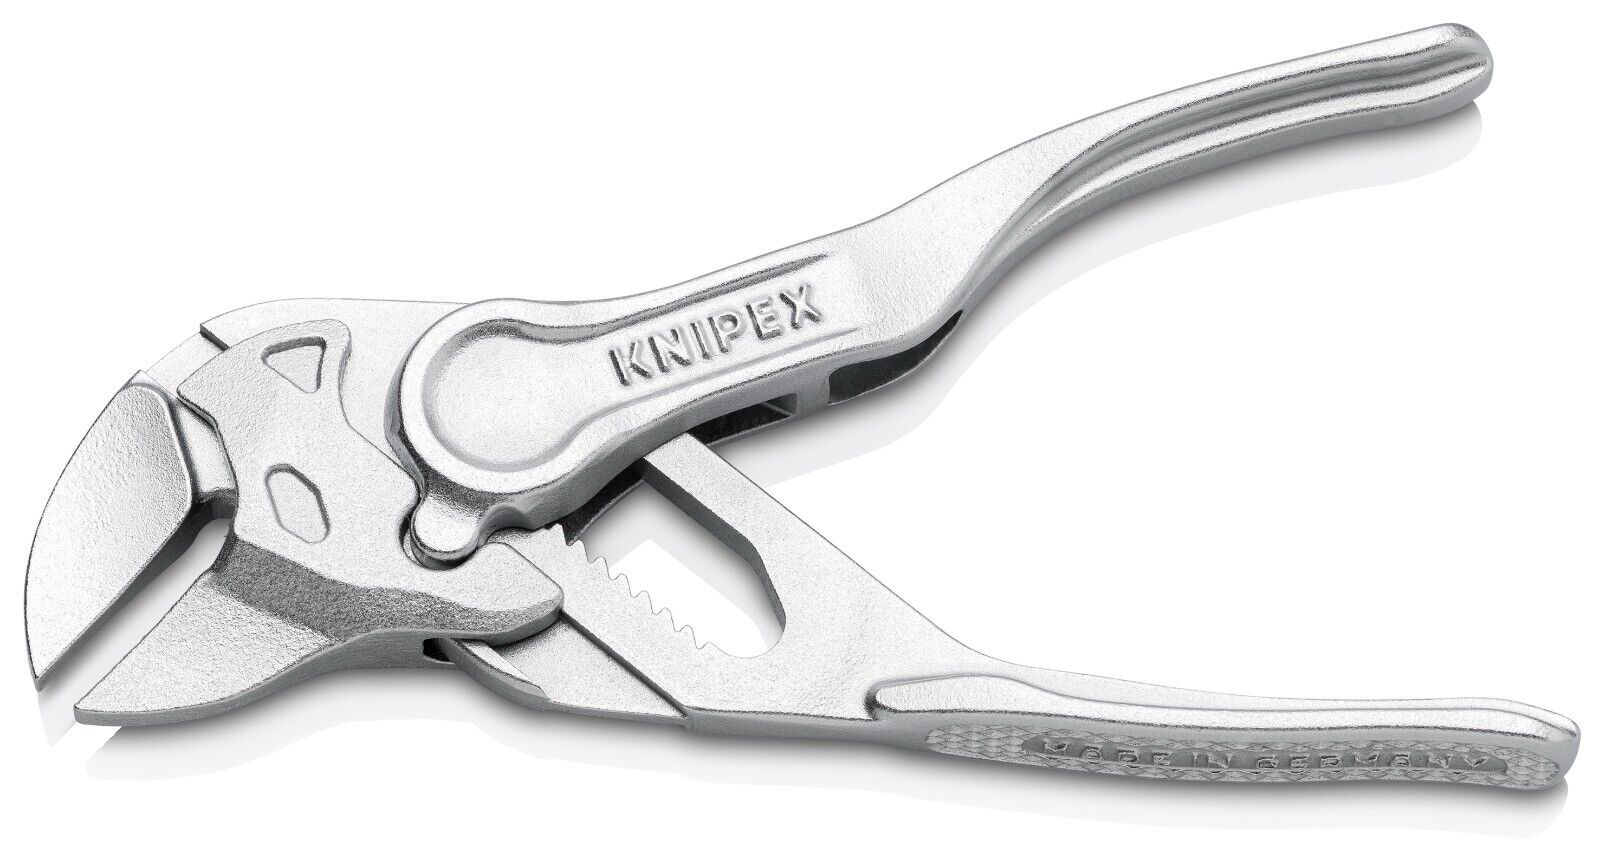 Knipex Plier Wrench - Small Boats Magazine